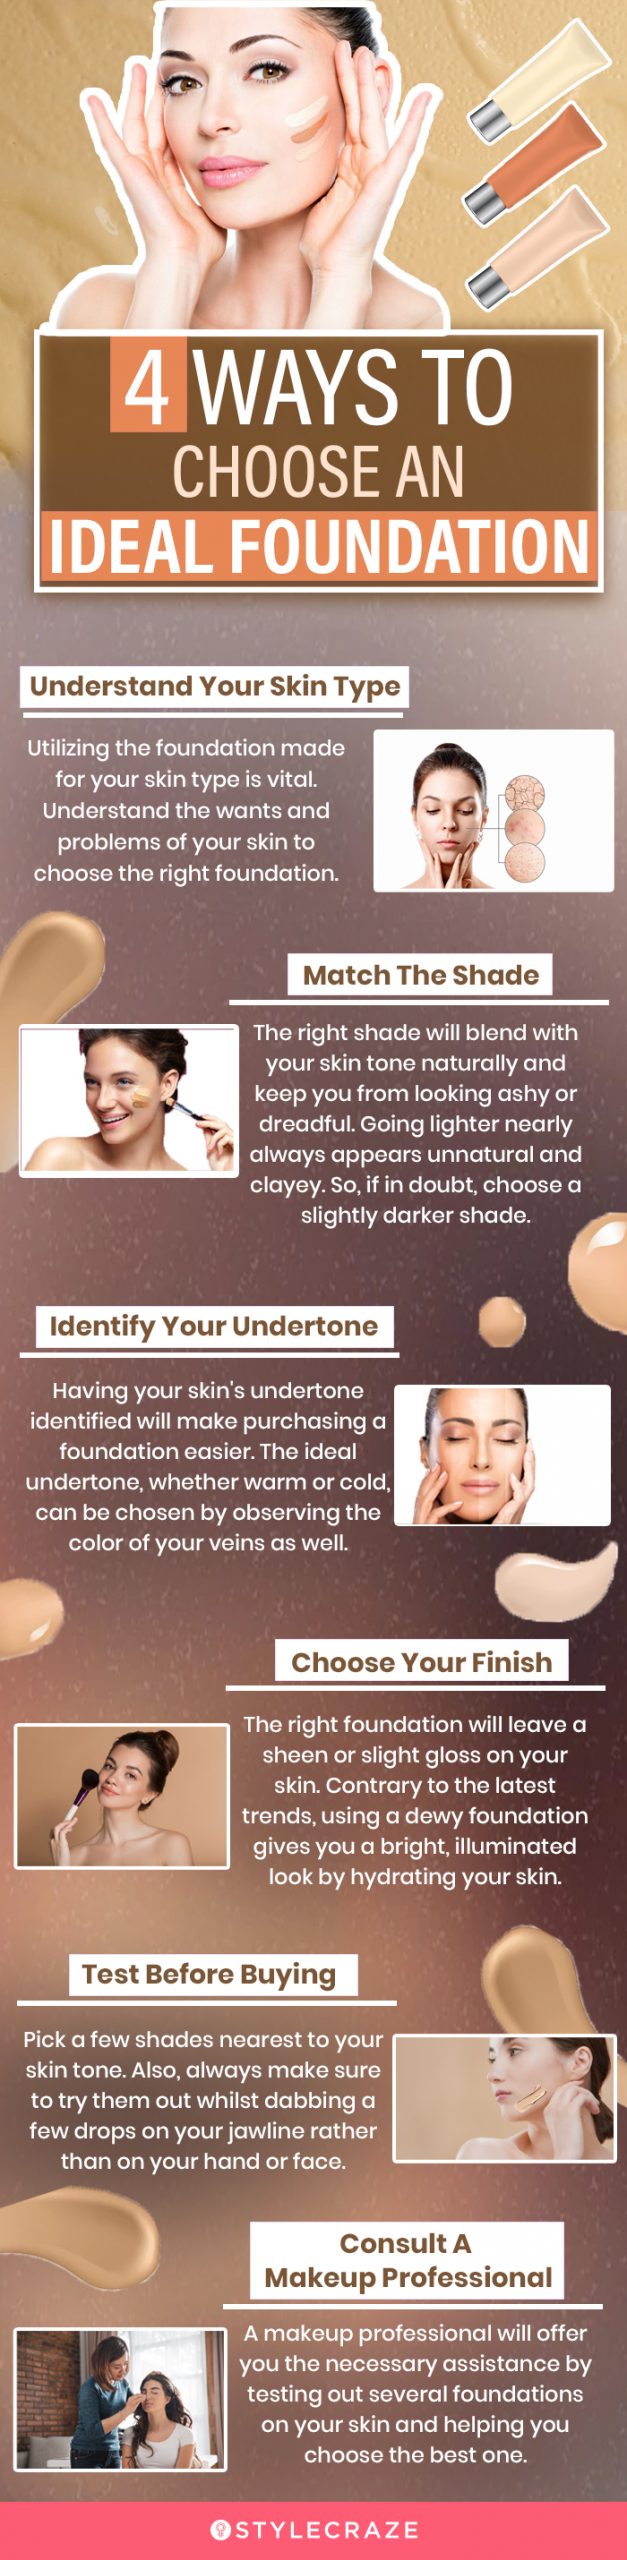 How to Choose the Best Foundation for My Skin Tone  